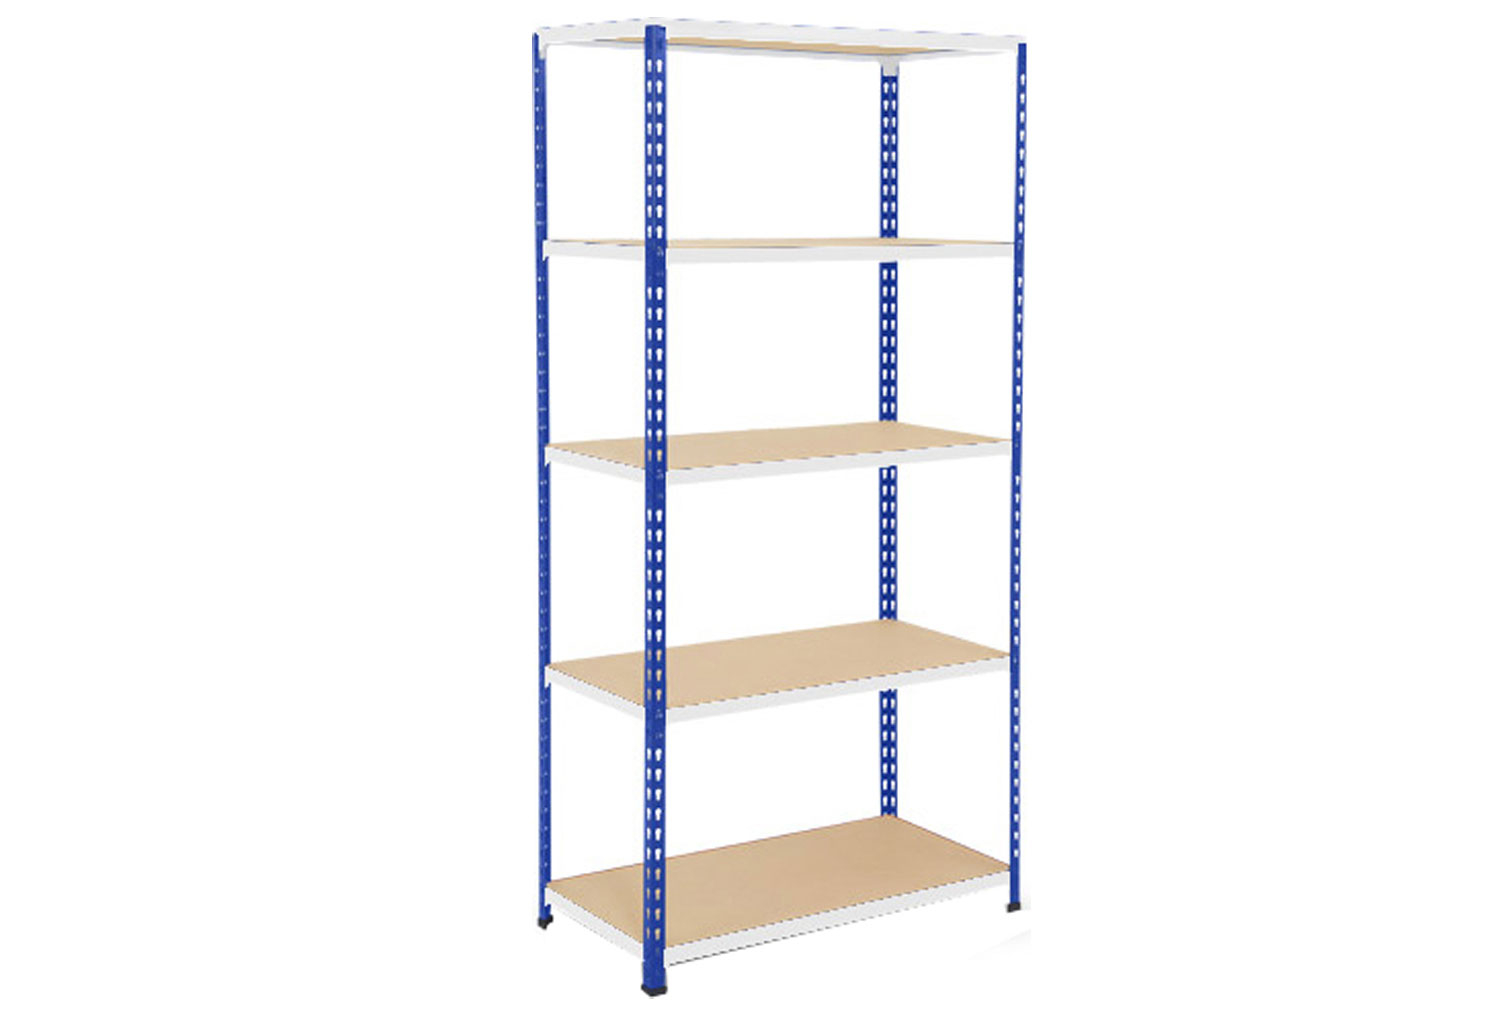 Rapid 2 Shelving With 5 Chipboard Shelves 915wx1980h (Blue/Grey), Express Delivery